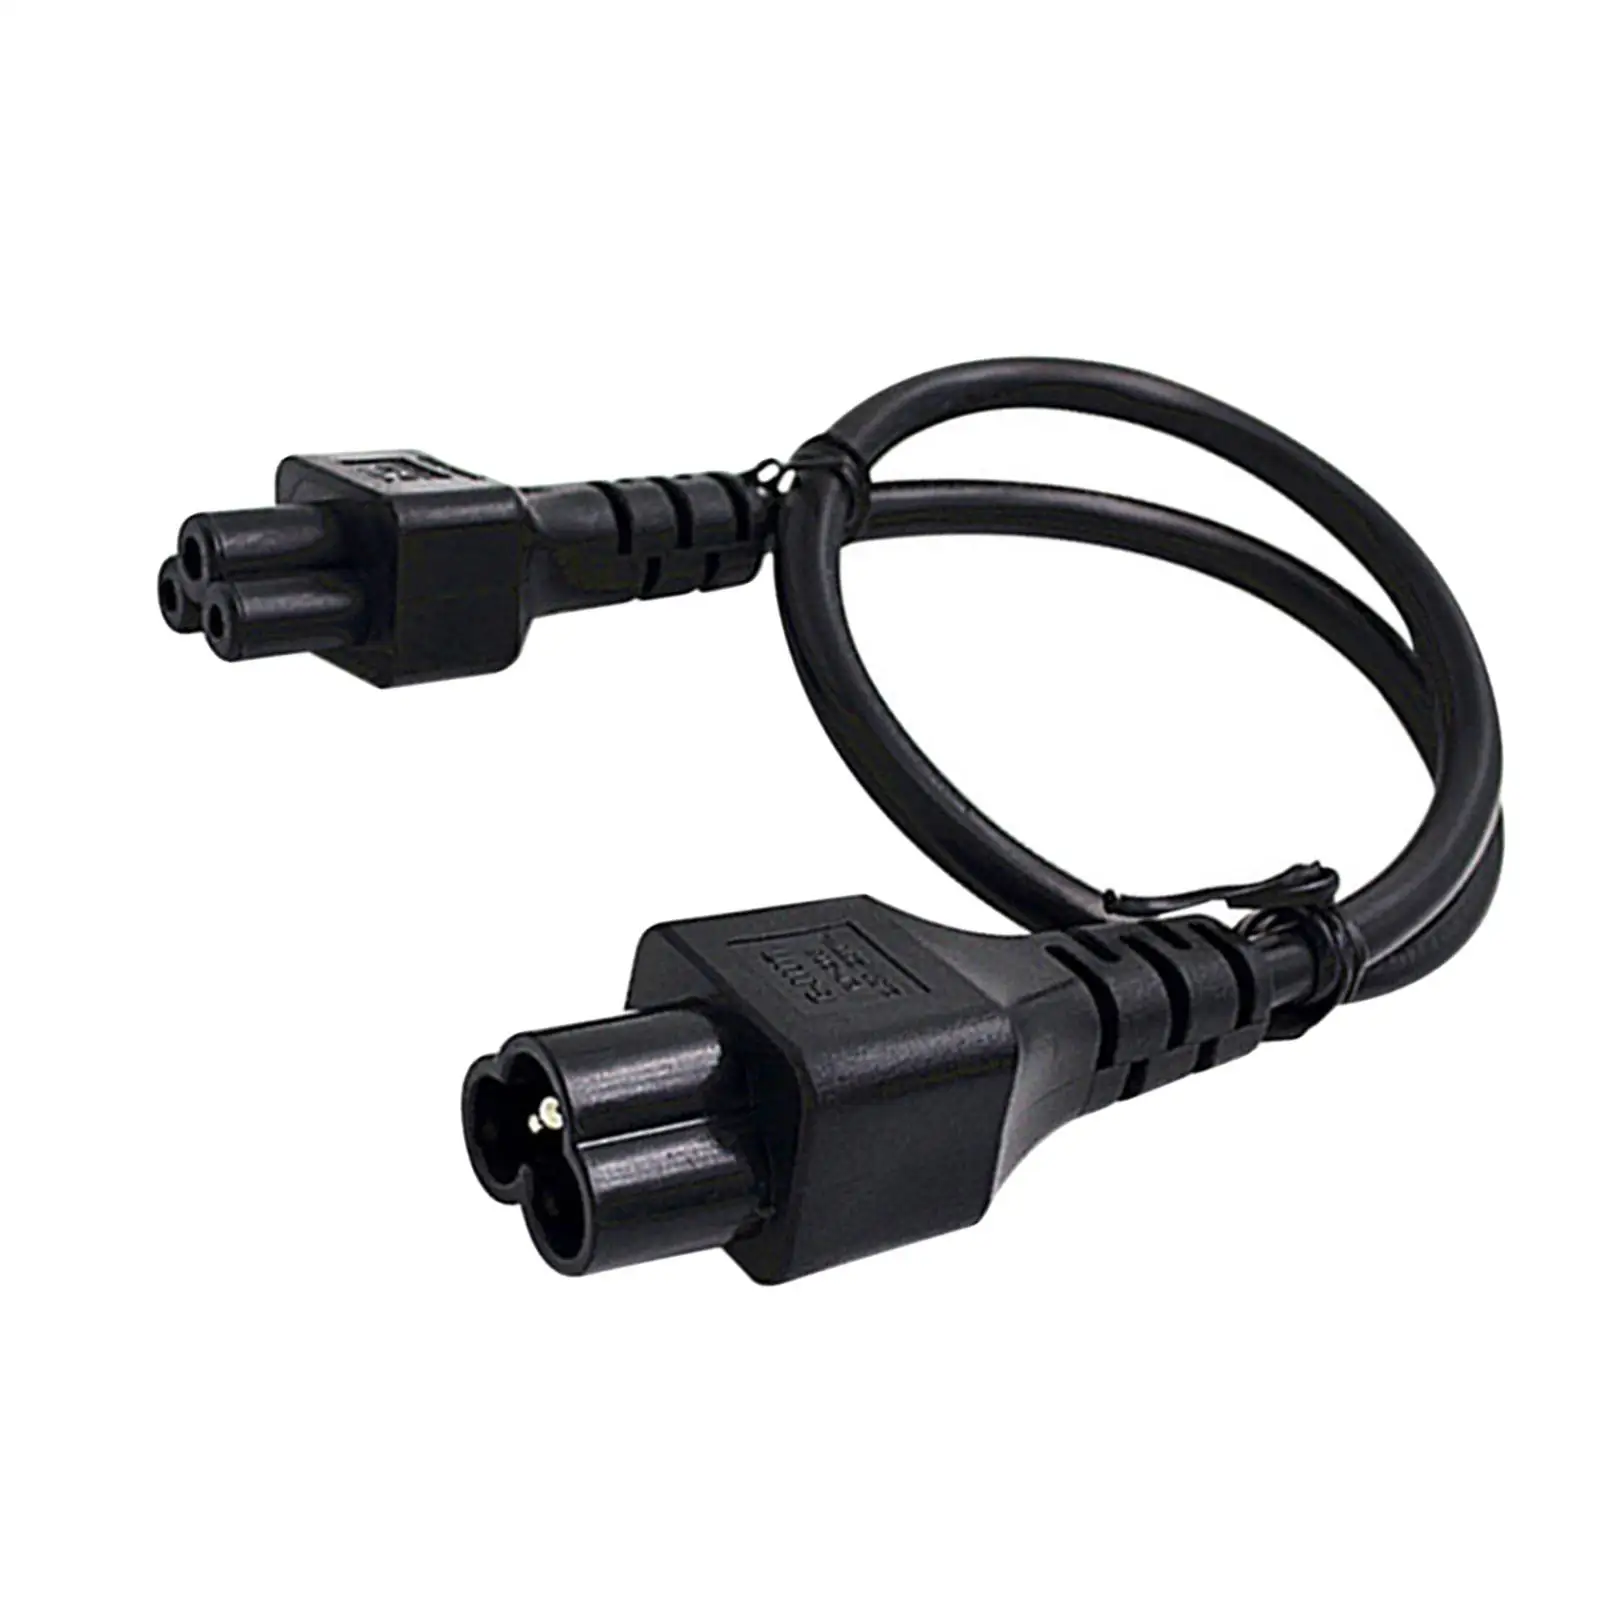 C6 to C5 PC Power Cord Cable Low Resistance Stable Transmission for Scanner Computer